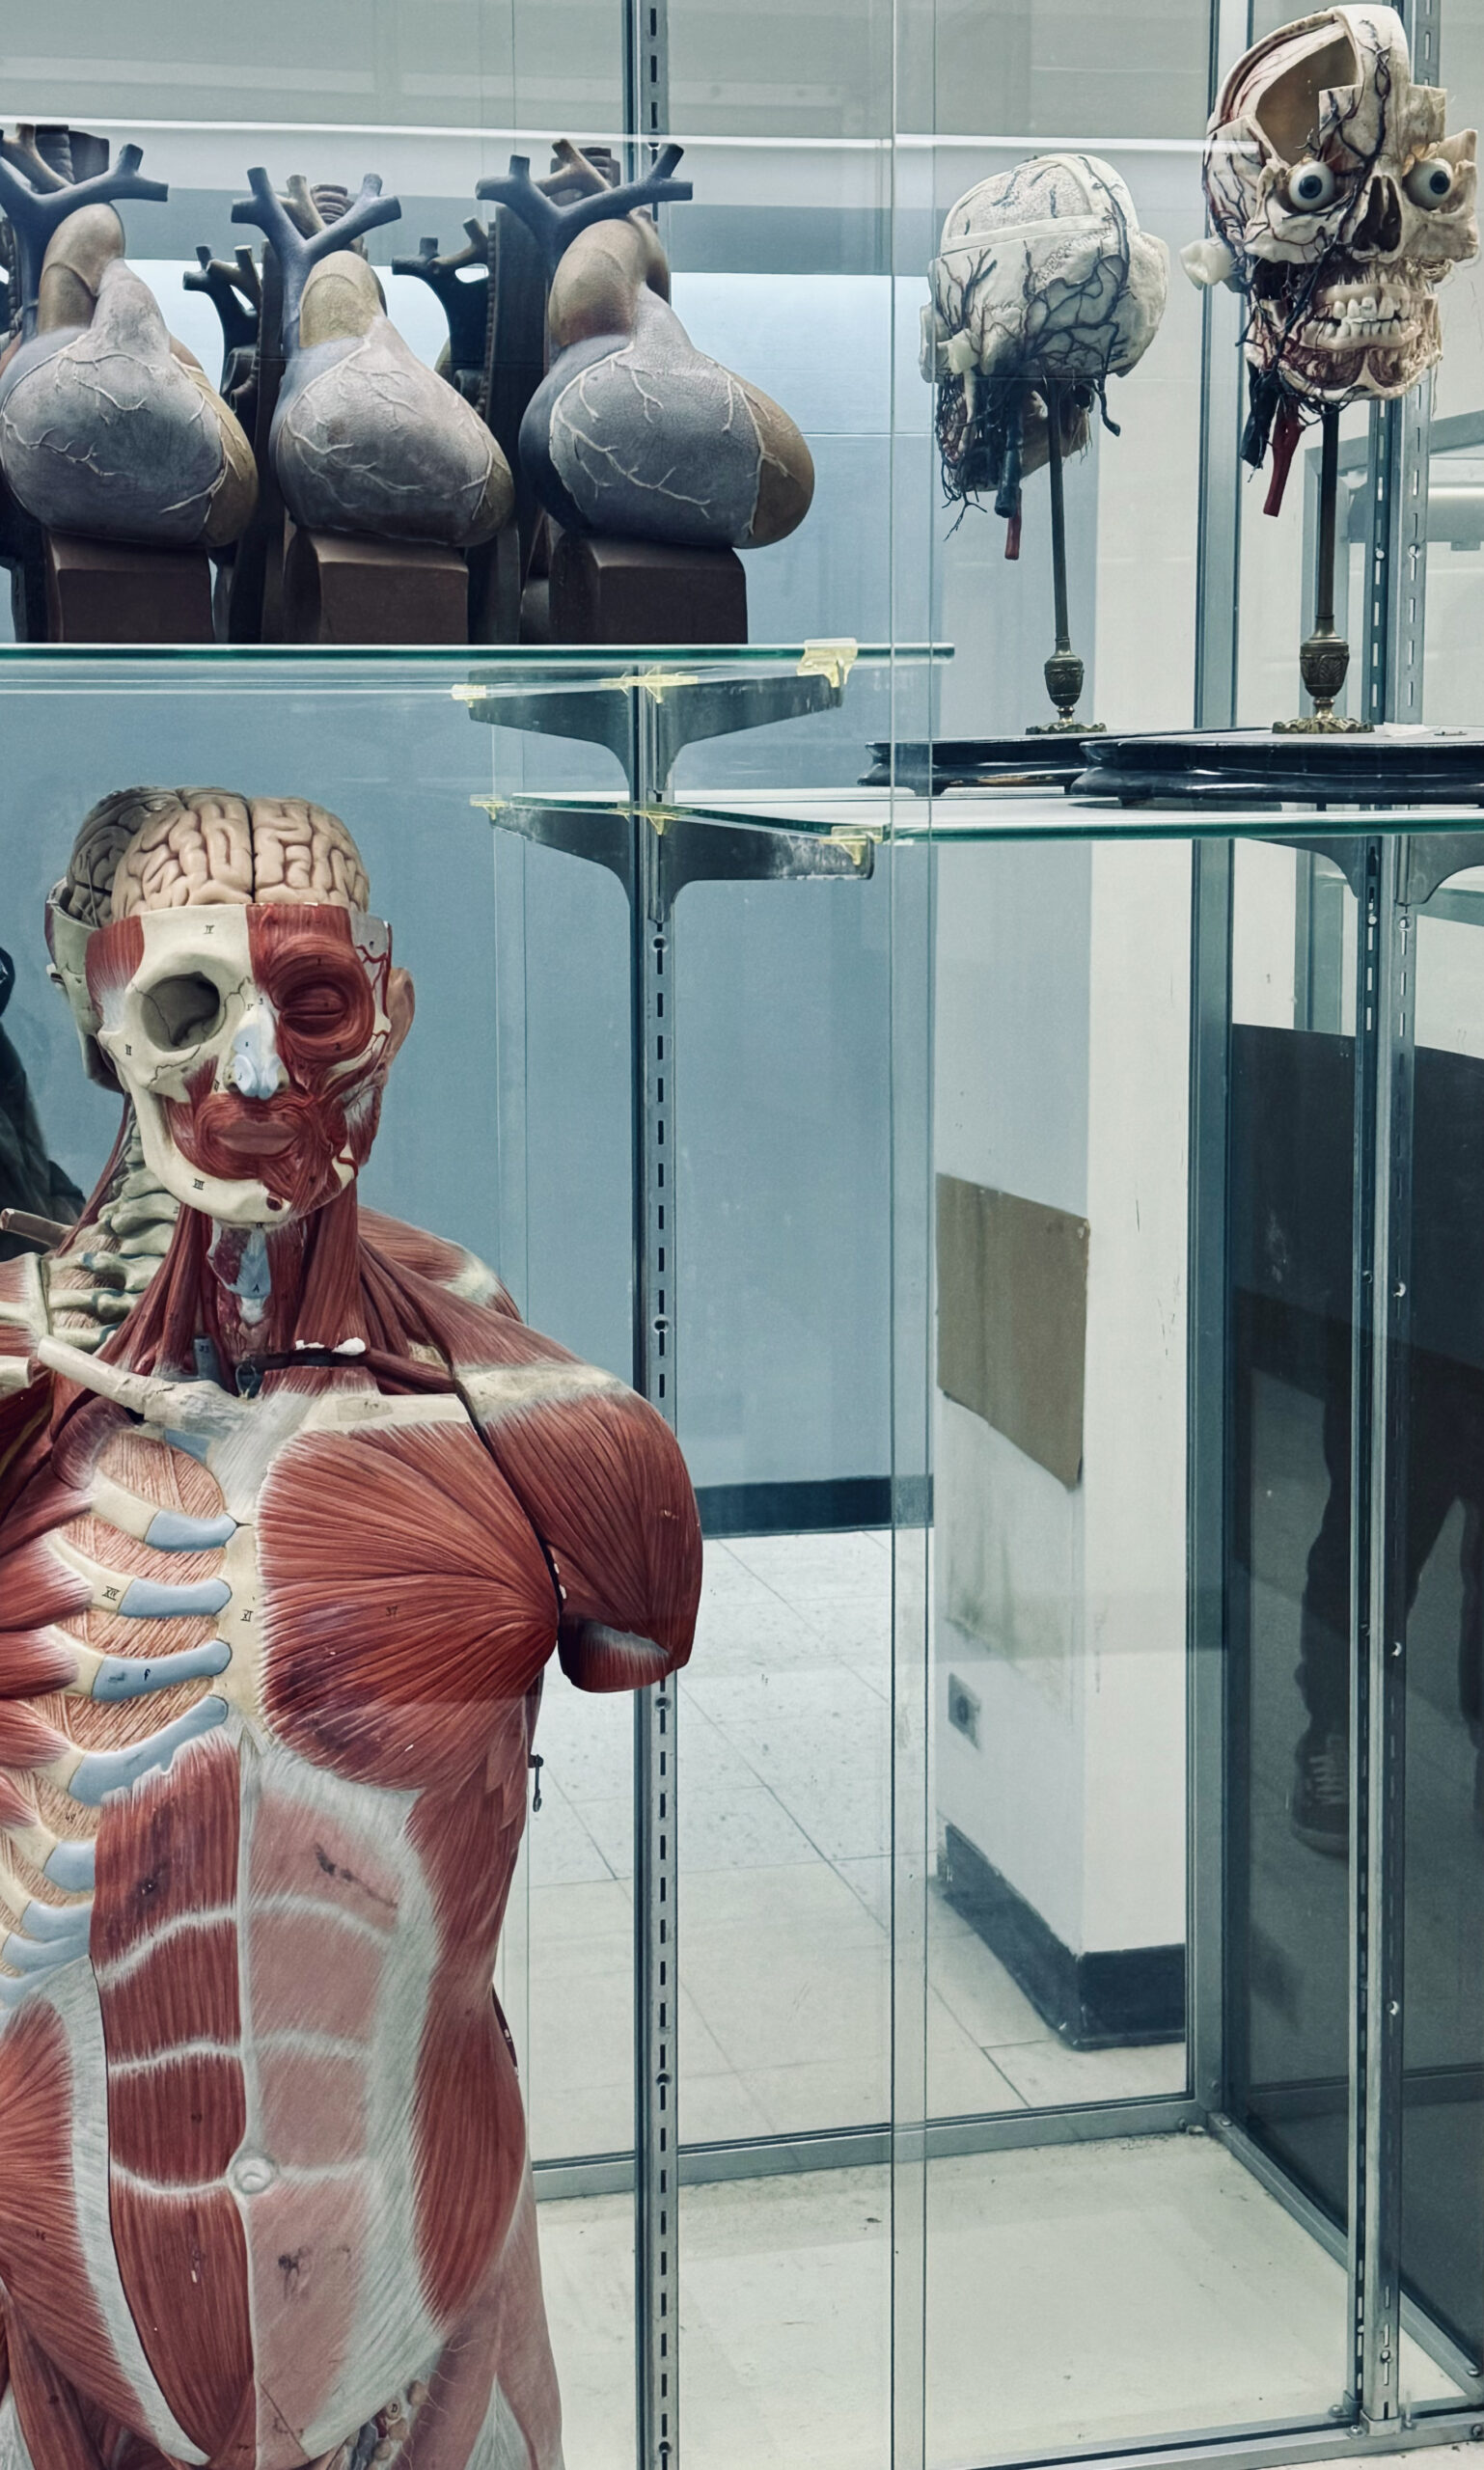 Models of the human anatomy in a science lab.